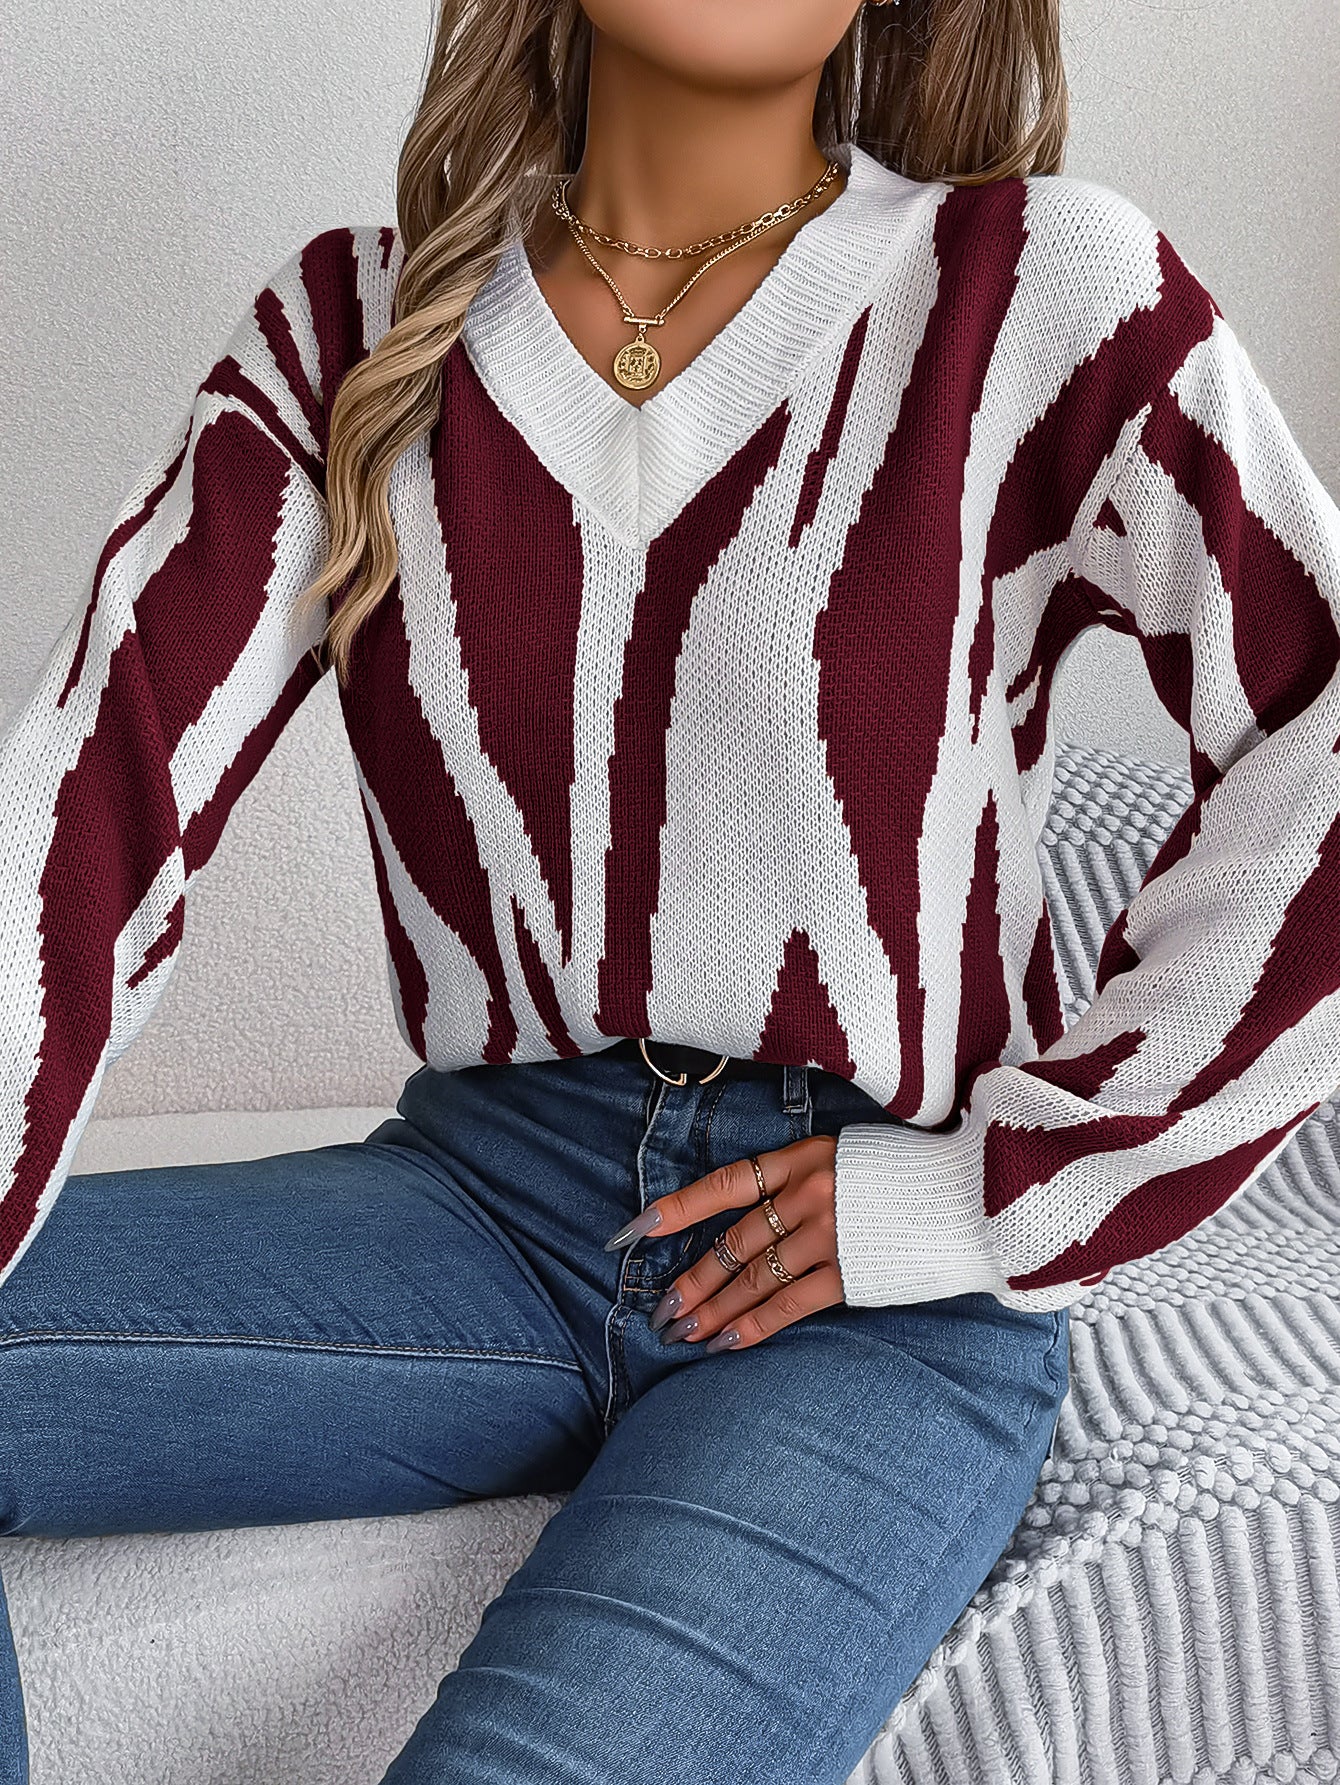 BamBam Autumn And Winter Casual V-Neck Contrast Color Long Sleeve Pullover Basic Sweater Women's Clothing - BamBam